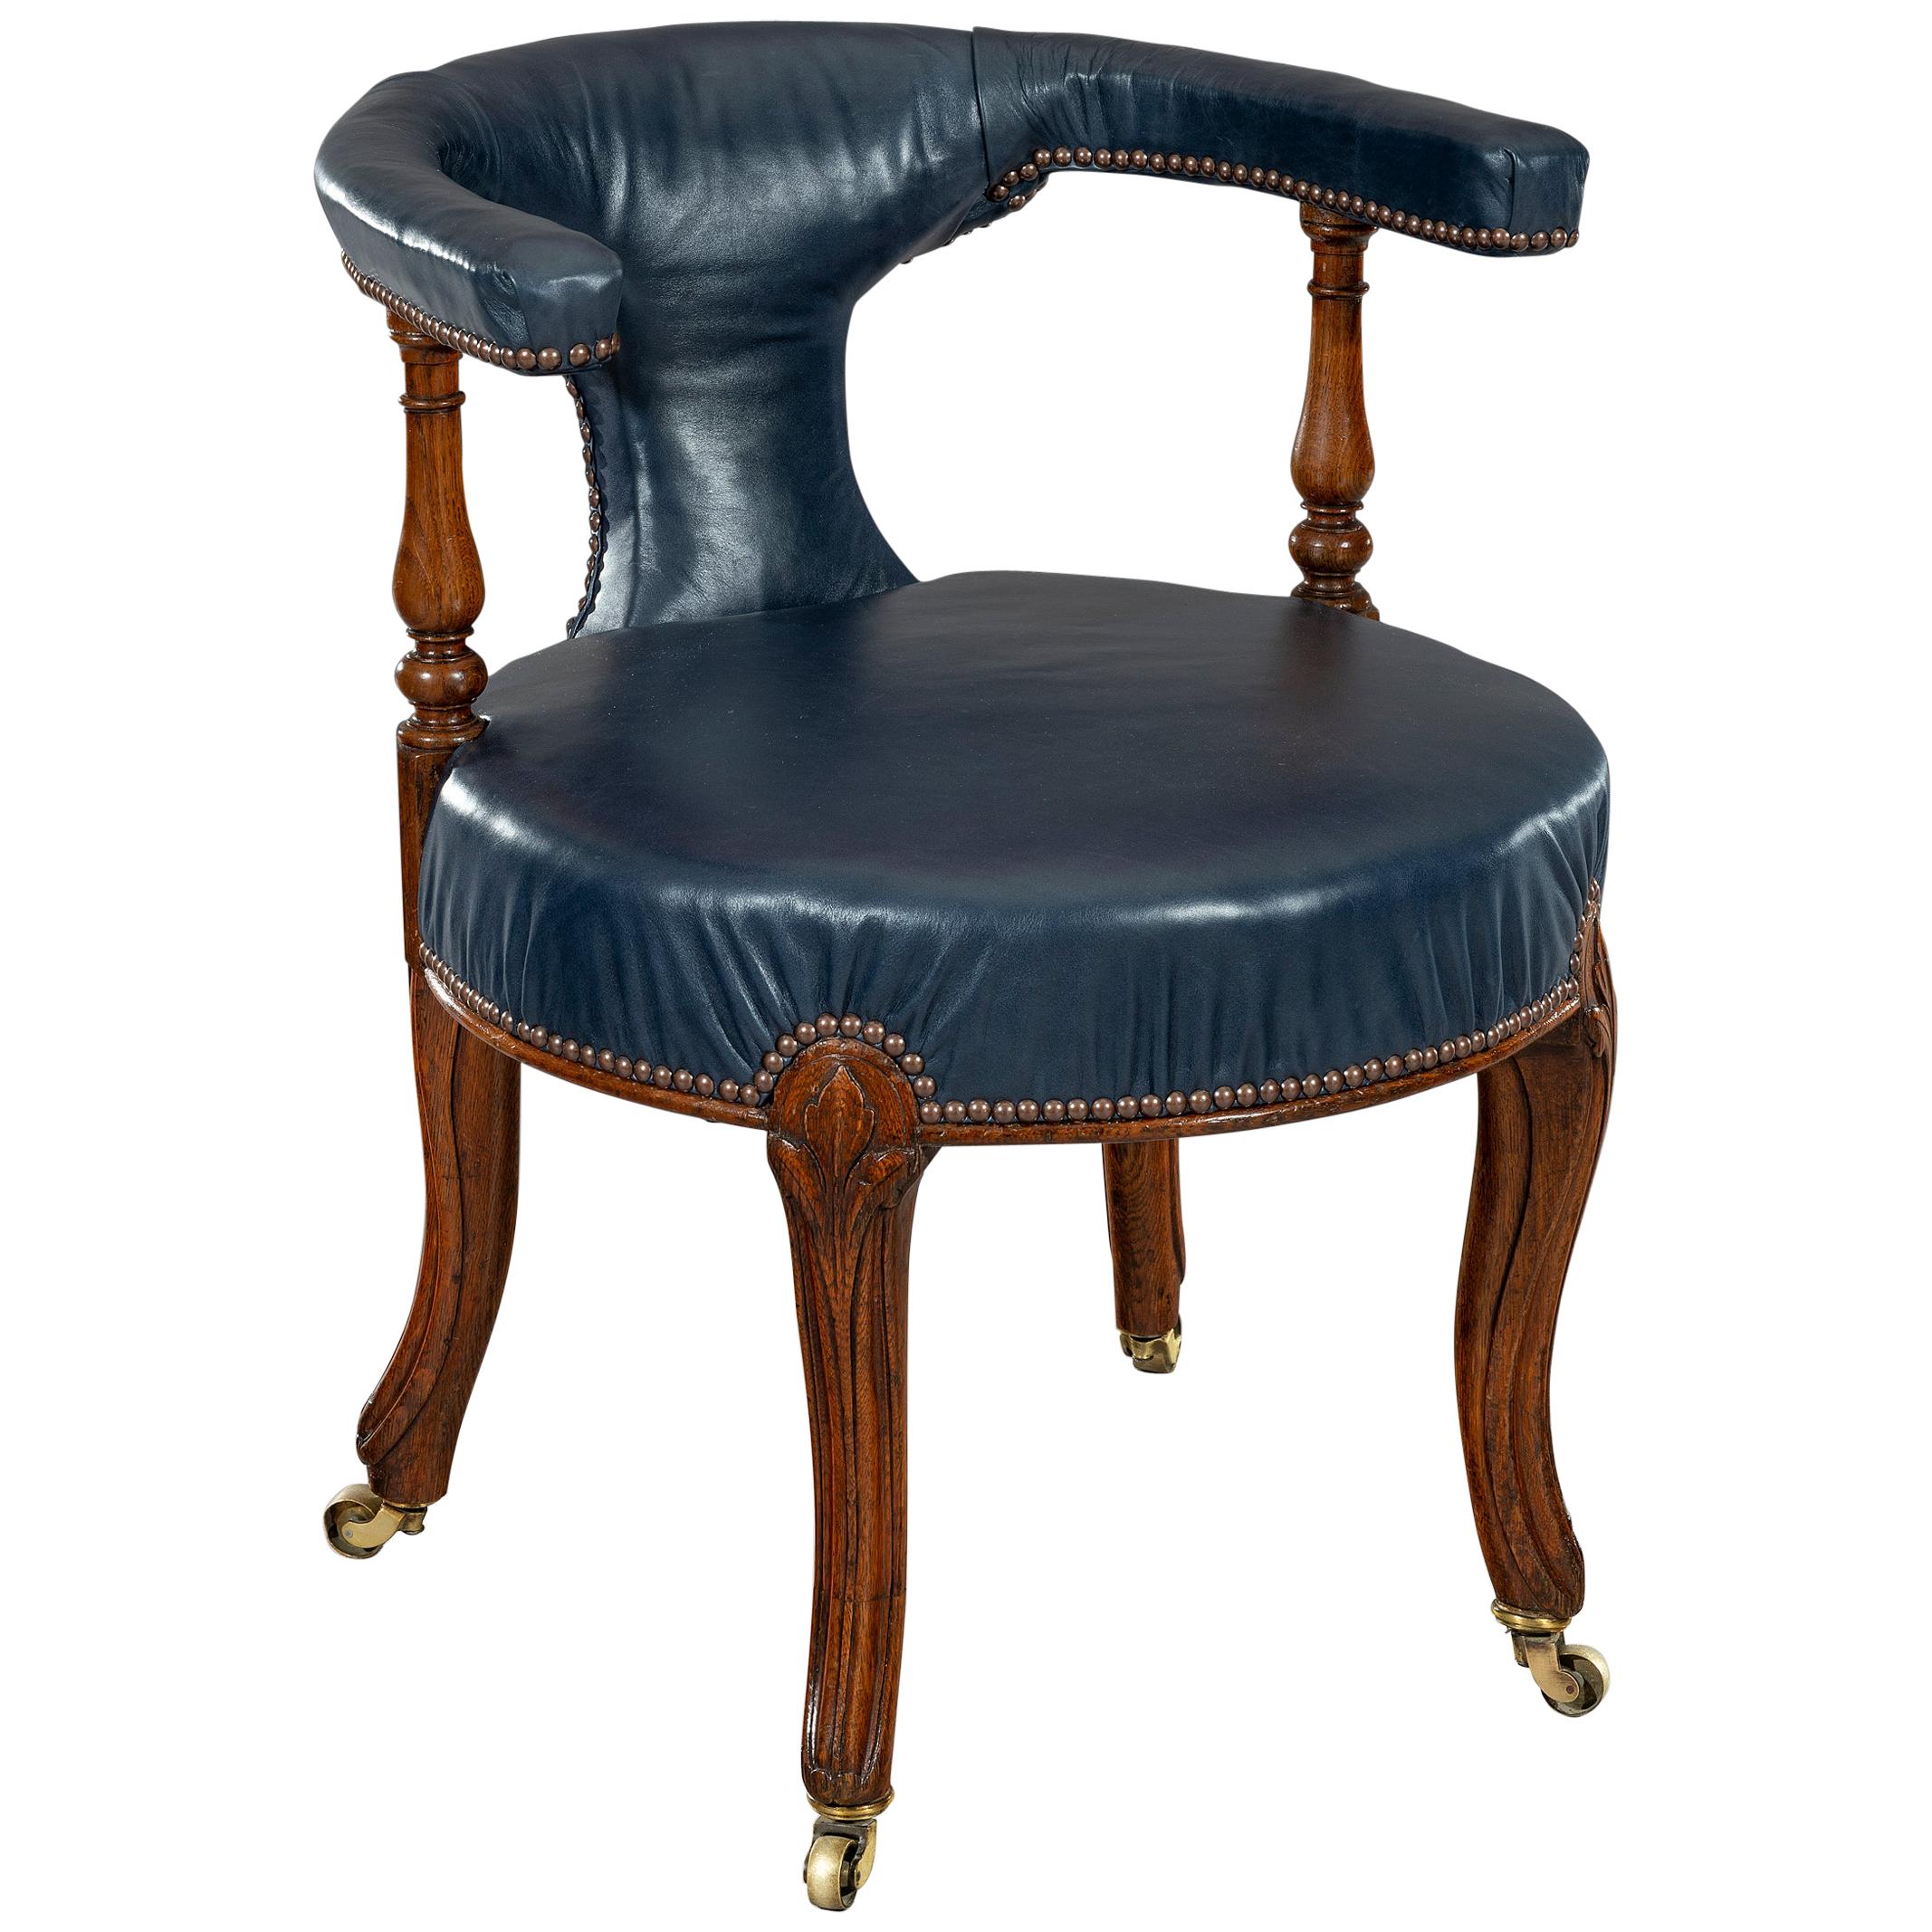 19th Century Circular Oak Desk Chair Stamped 'Gillow' For Sale